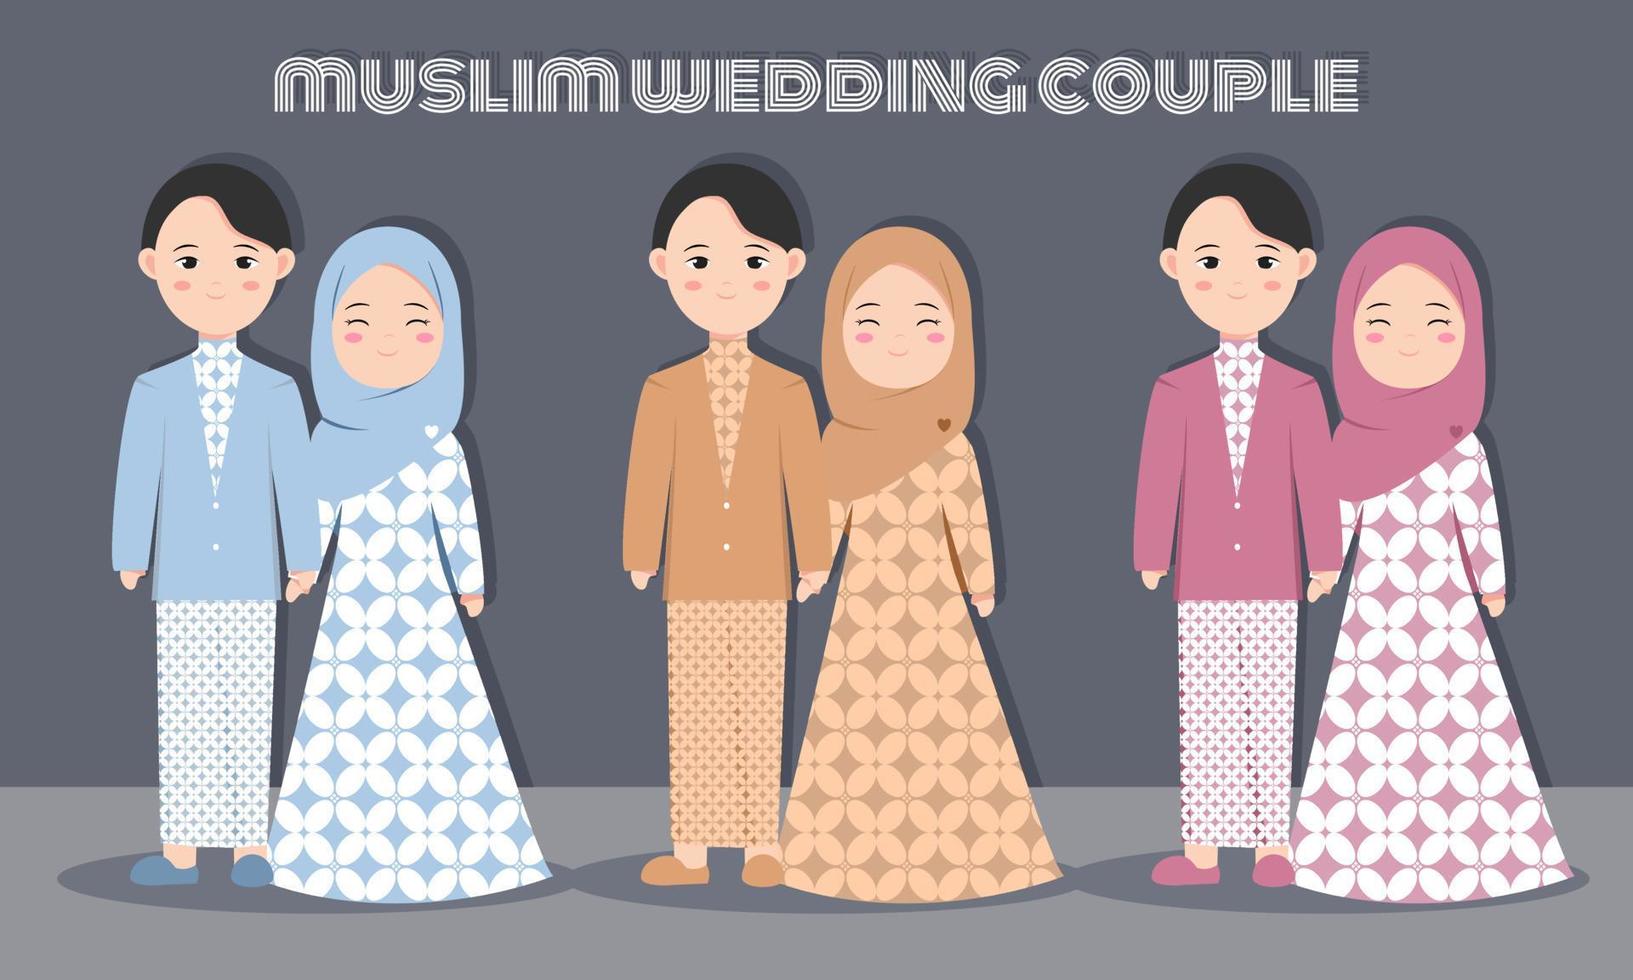 cute muslim couple character set with batik dress for wedding or engagement invitation card. Vector illustration in cartoon of a couple in love